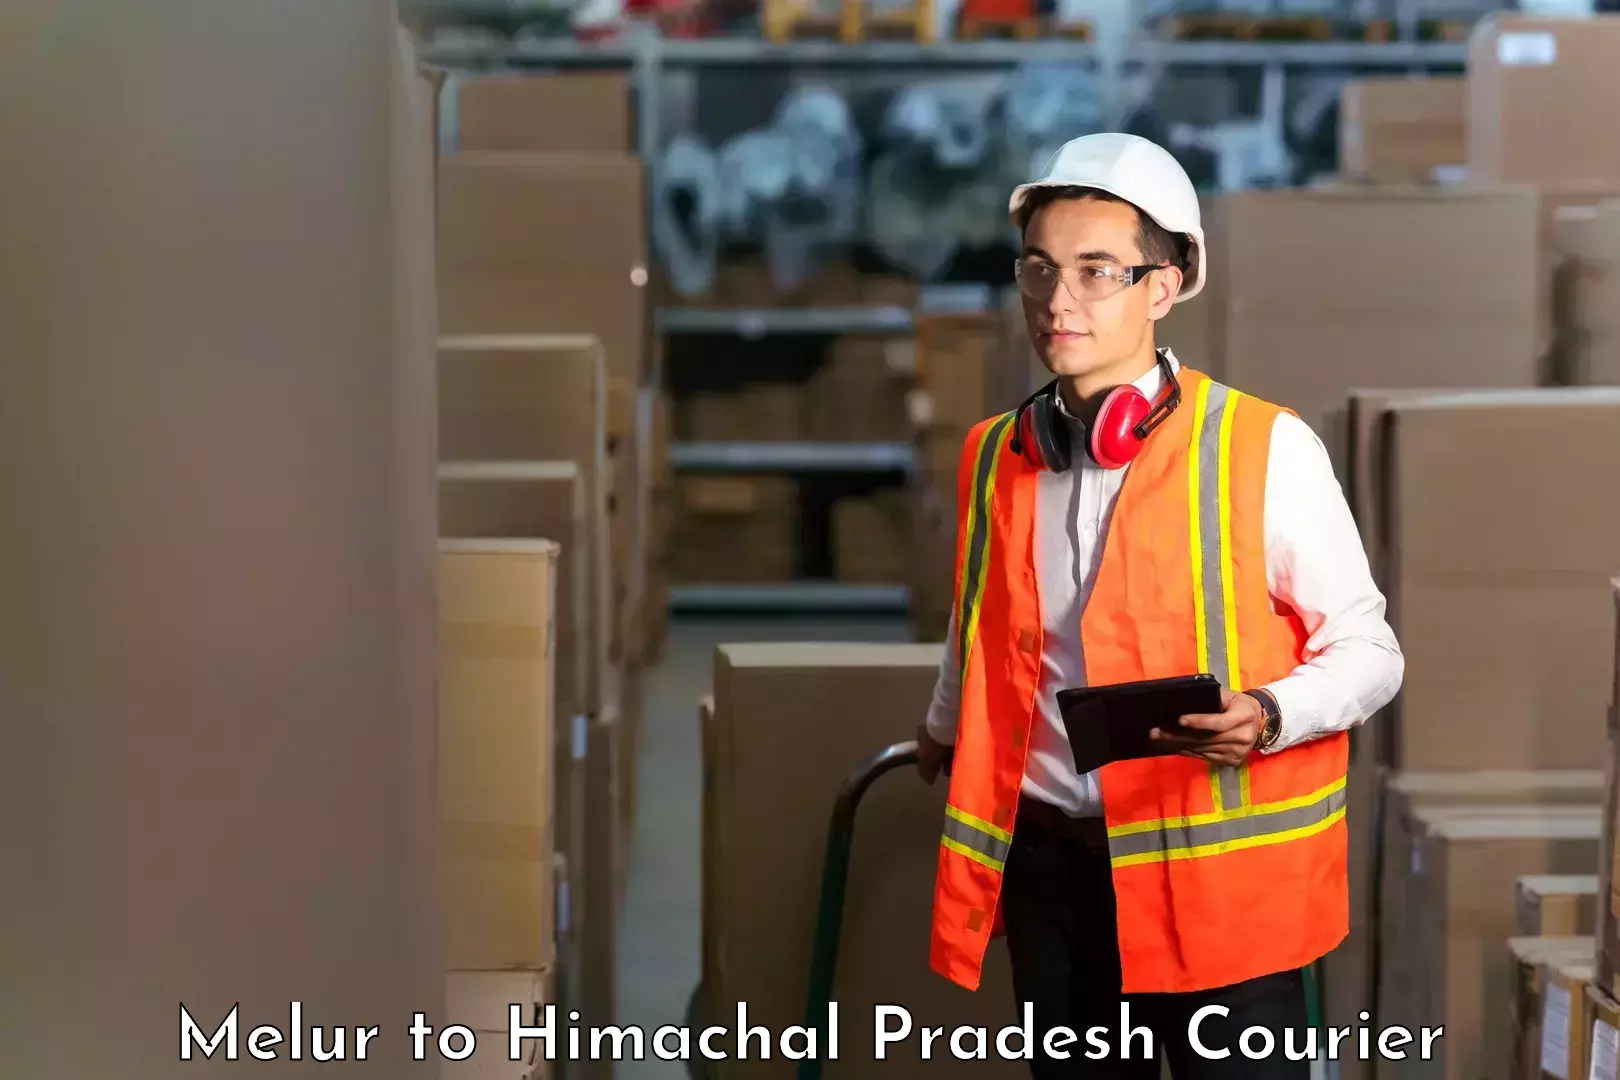 State-of-the-art courier technology Melur to Himachal Pradesh